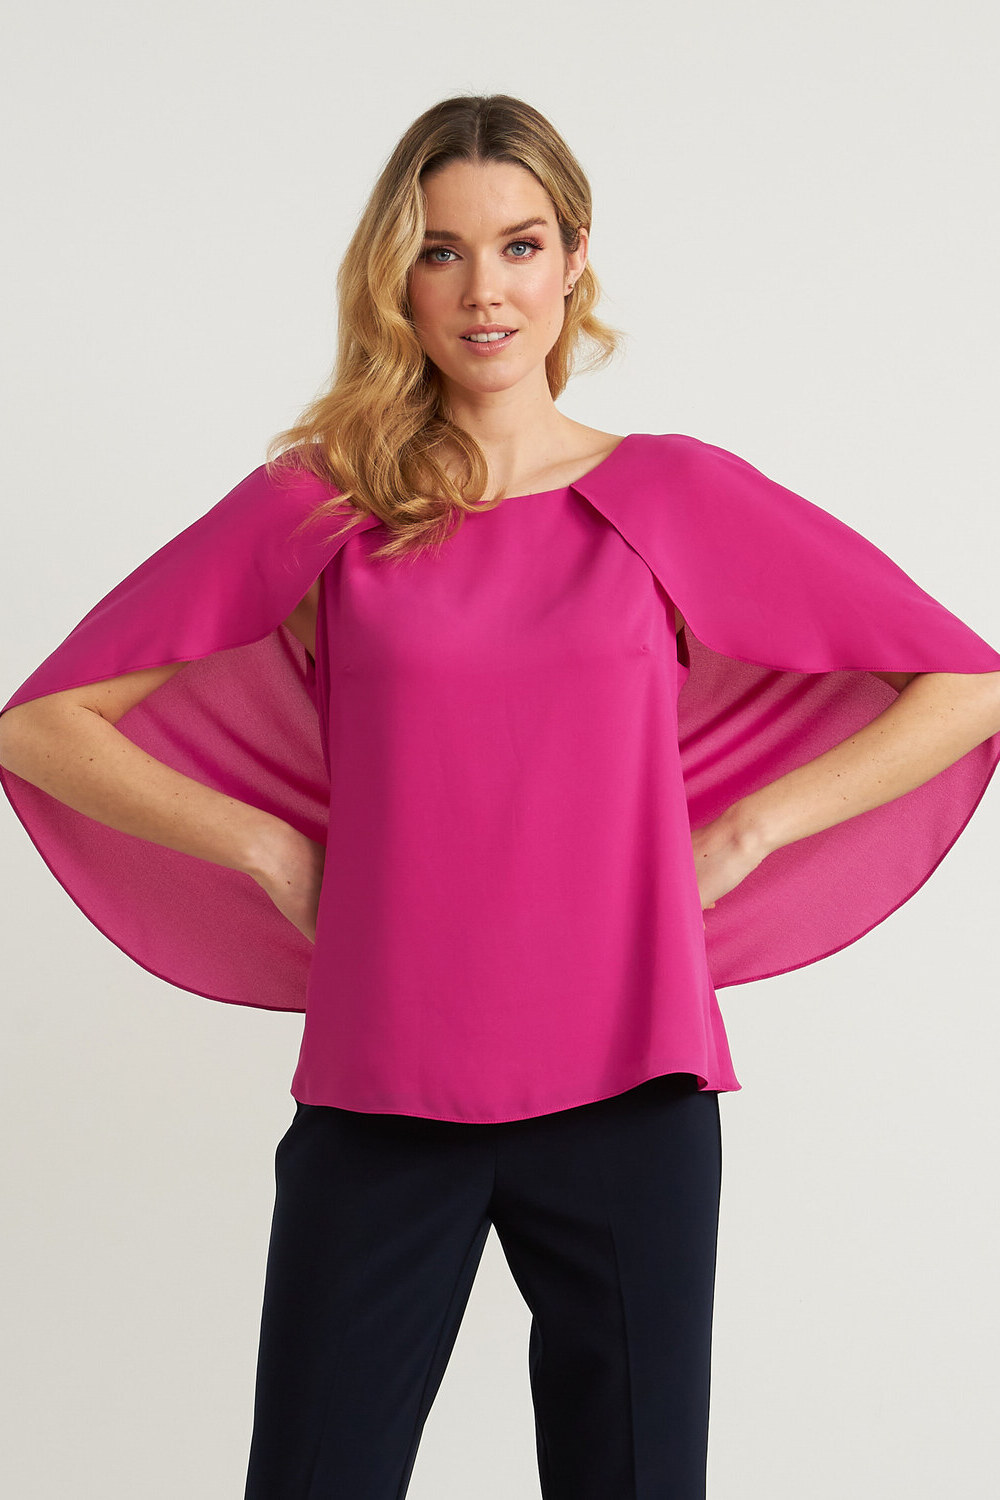 Joseph Ribkoff Cape Sleeve Back Tie Top Style 211232. Orchid